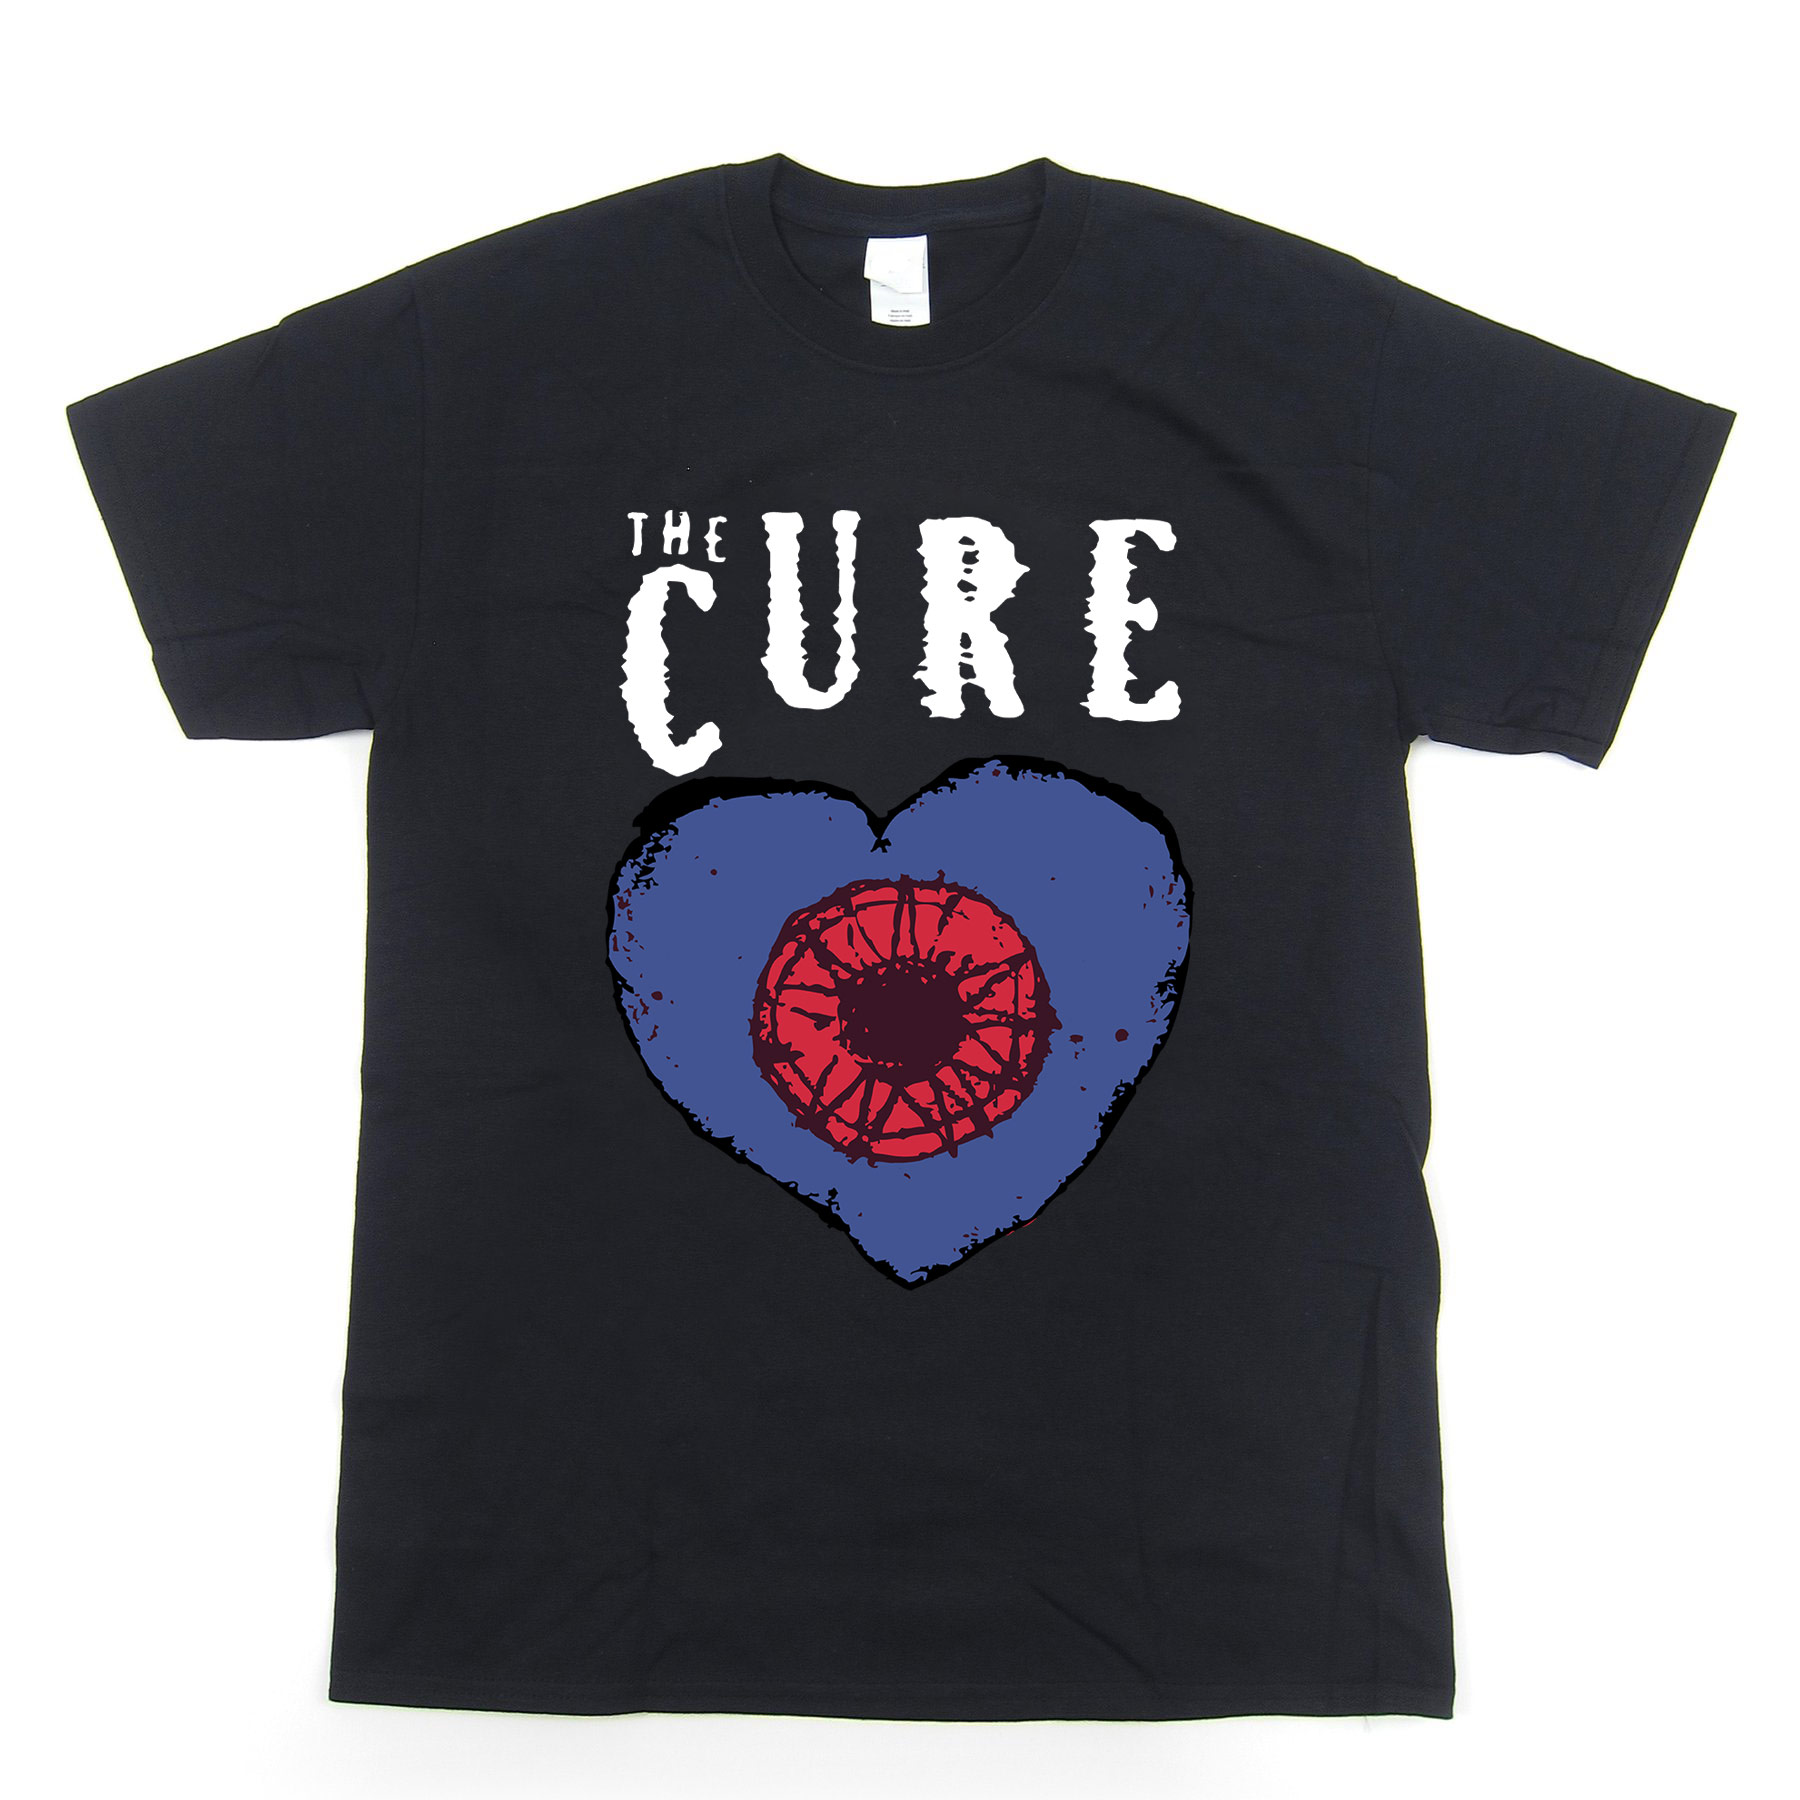 Friday i m in love the cure. The Cure Friday i'm in Love. The Cure Friday i'm in Love Art Shirt. Мужская футболка 3d the Cure m. The Cure Bloodflowers.